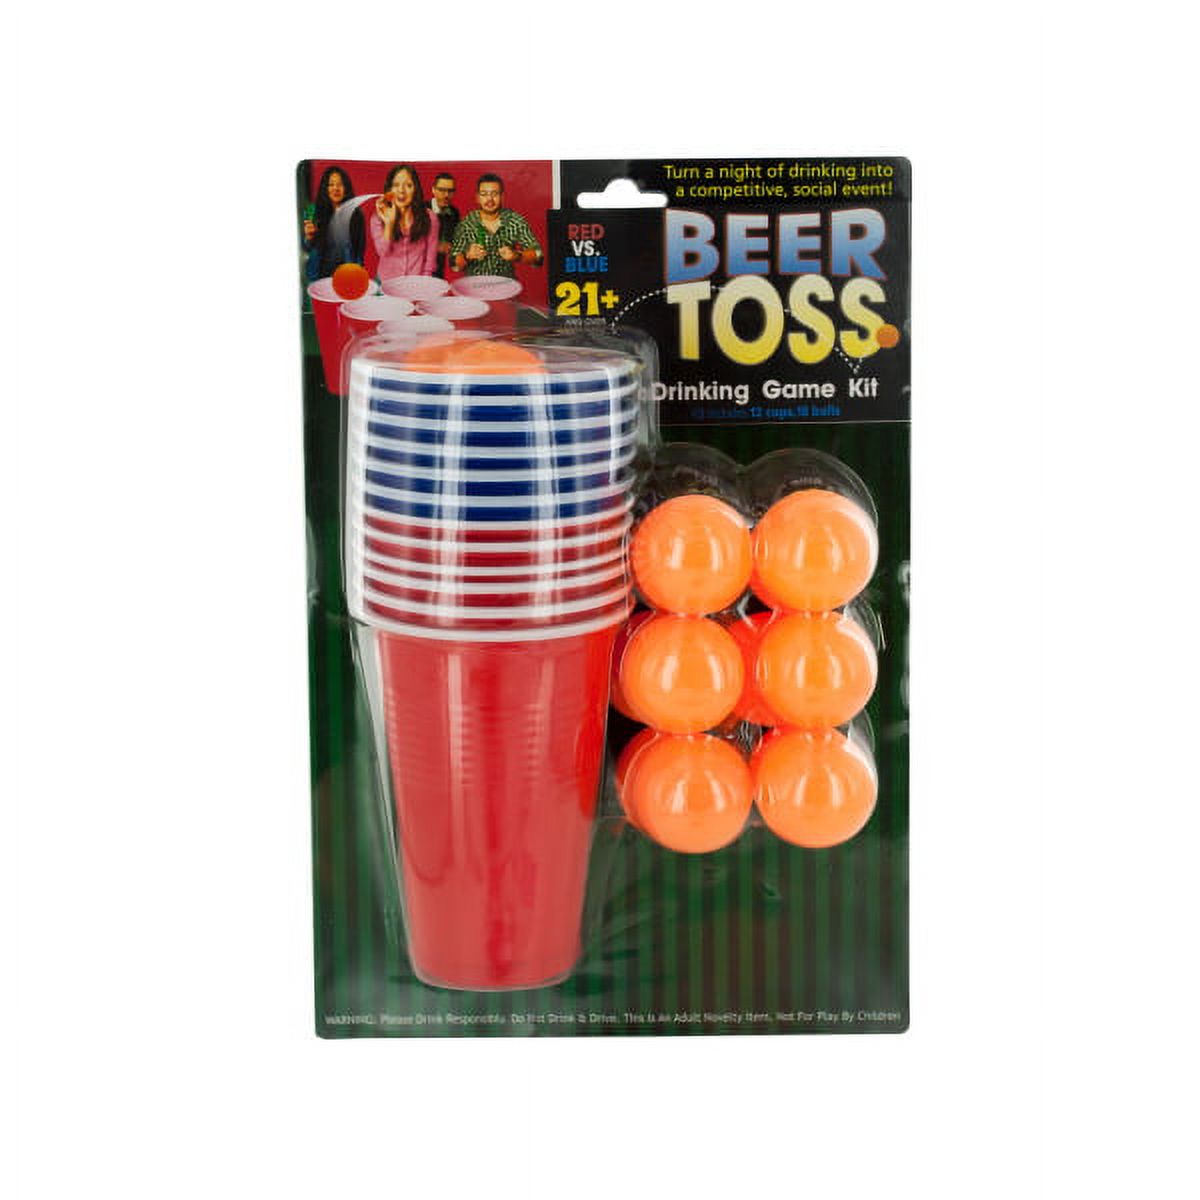 Beer Toss Drinking Game Kit (Available in a pack of 4) - image 1 of 2